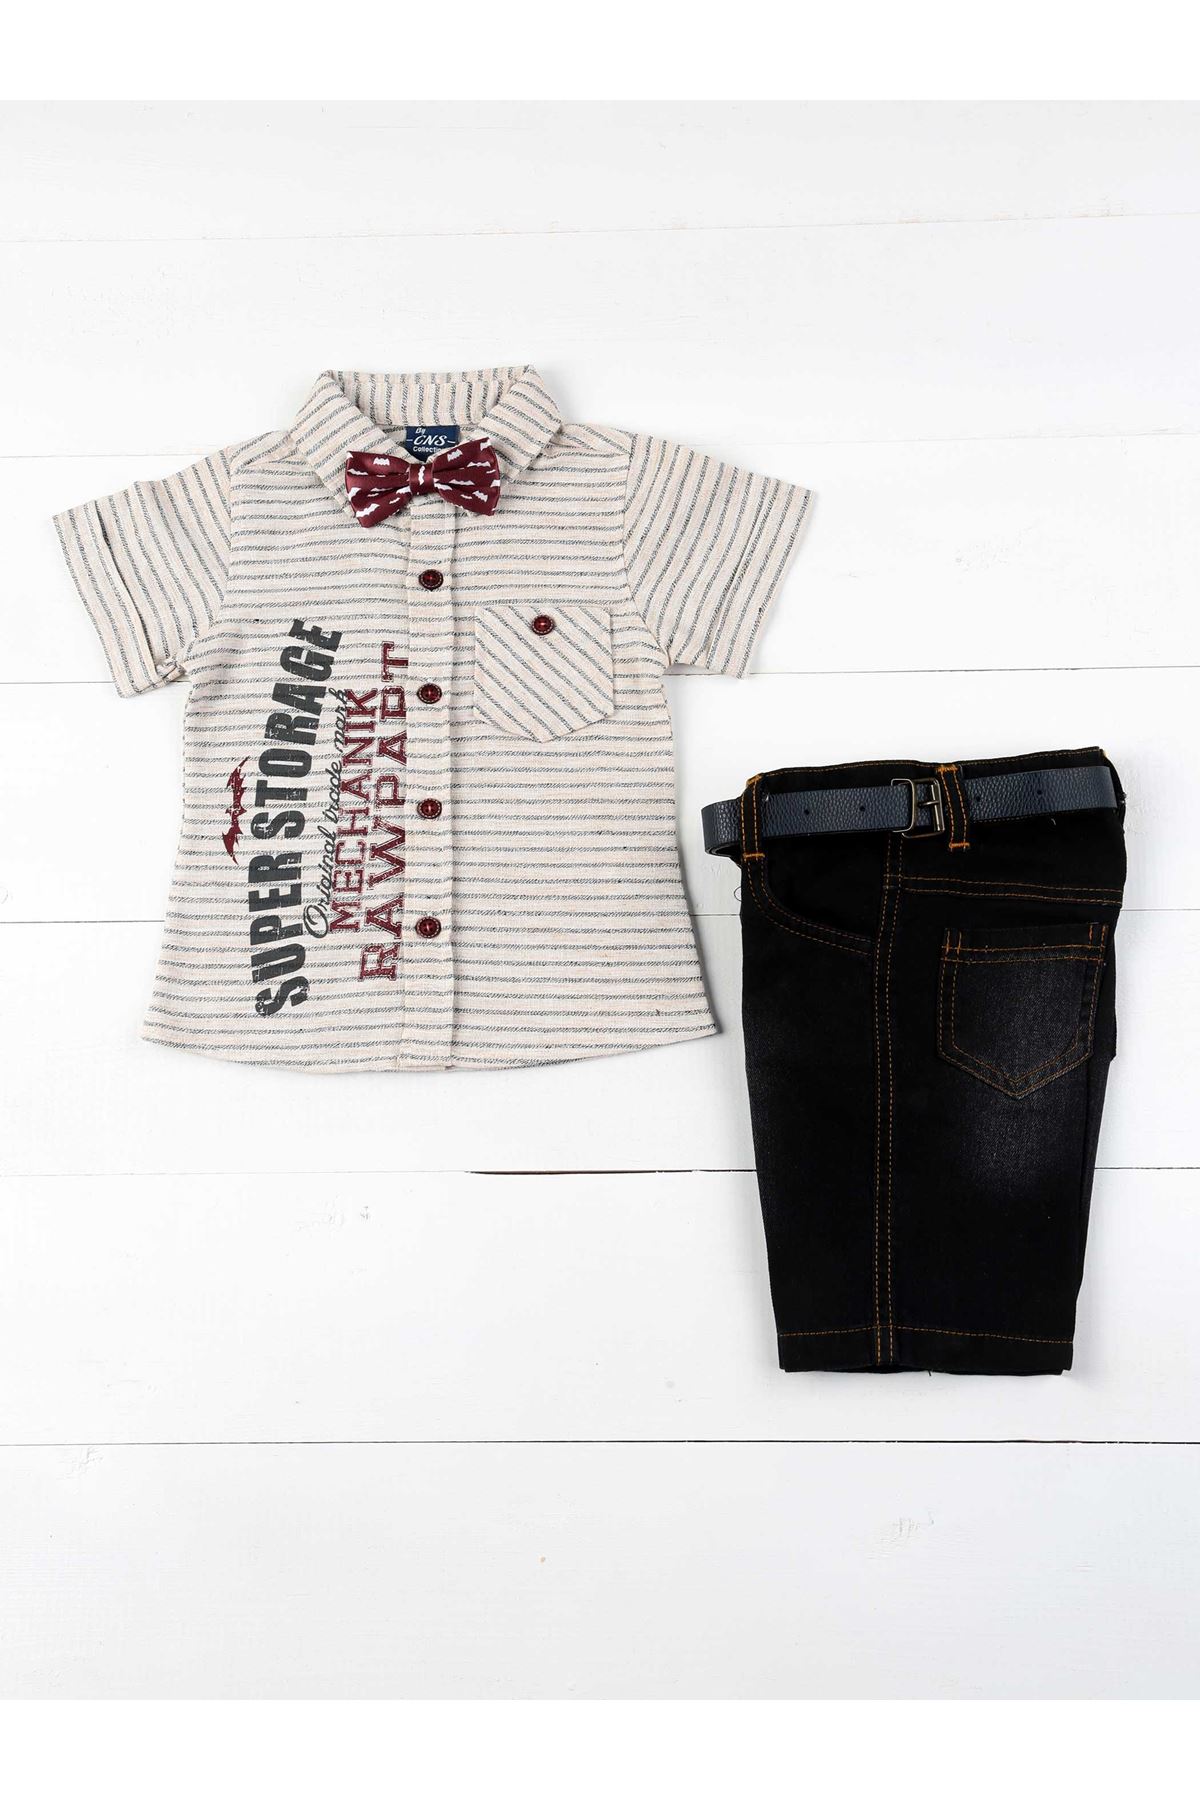 Boys clothing summer shorts belt shirt bow tie sets 4-piece daily holiday special occasions cotton fabric kids outfit